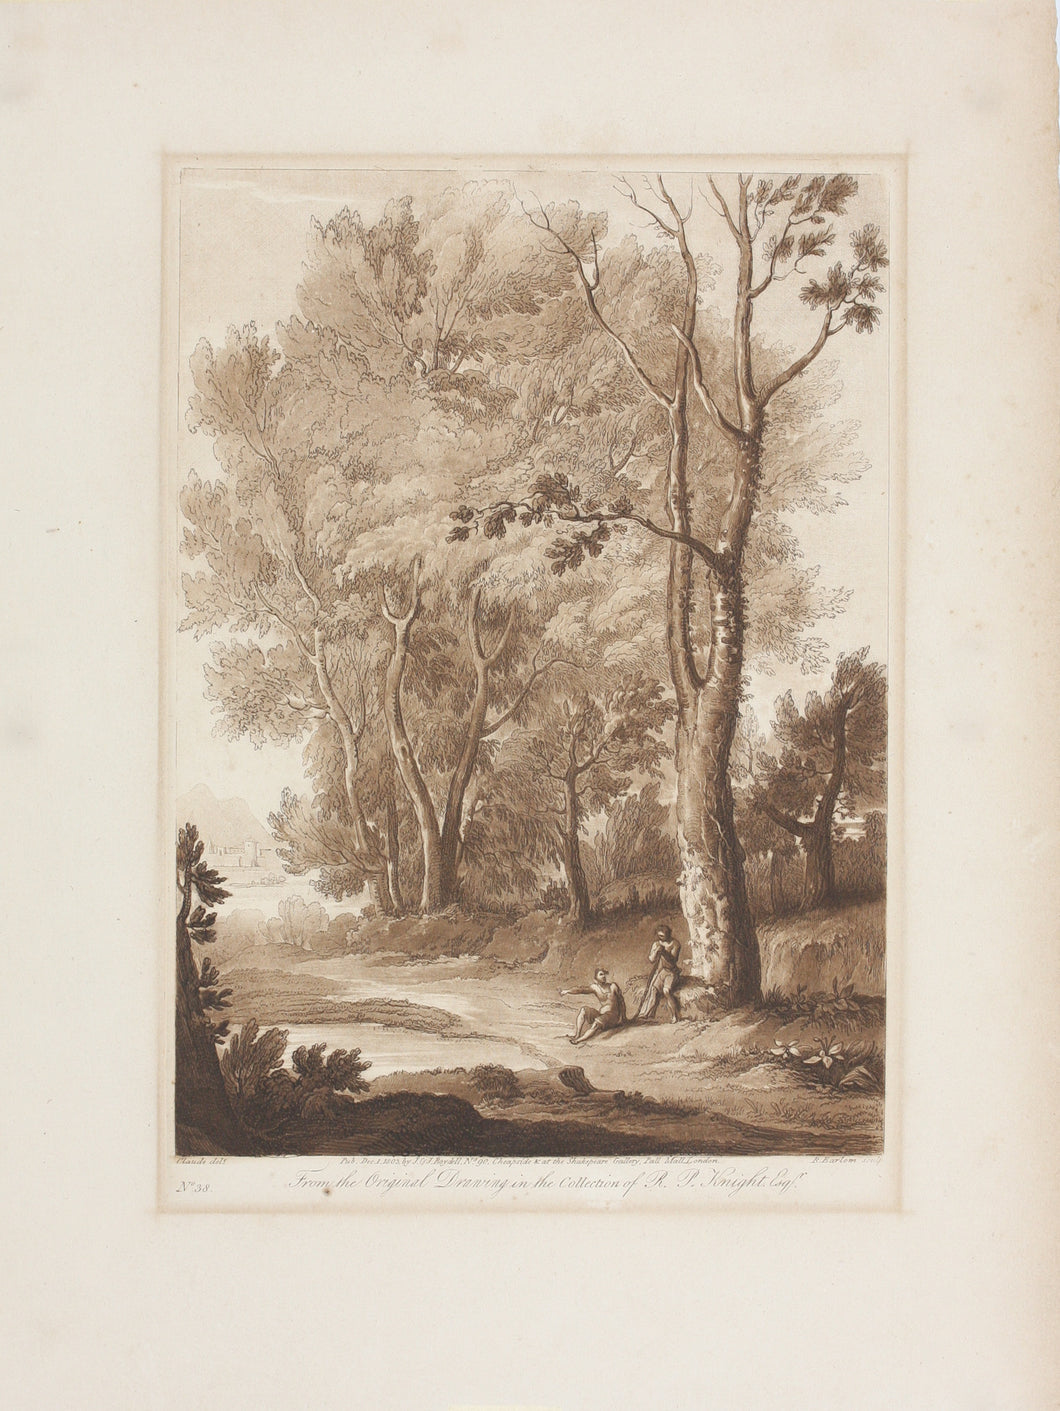 Claude Lorrain, after. A Landscape - Mercury and Apollo. No.38. Etching by Richard Earlom. 1803.